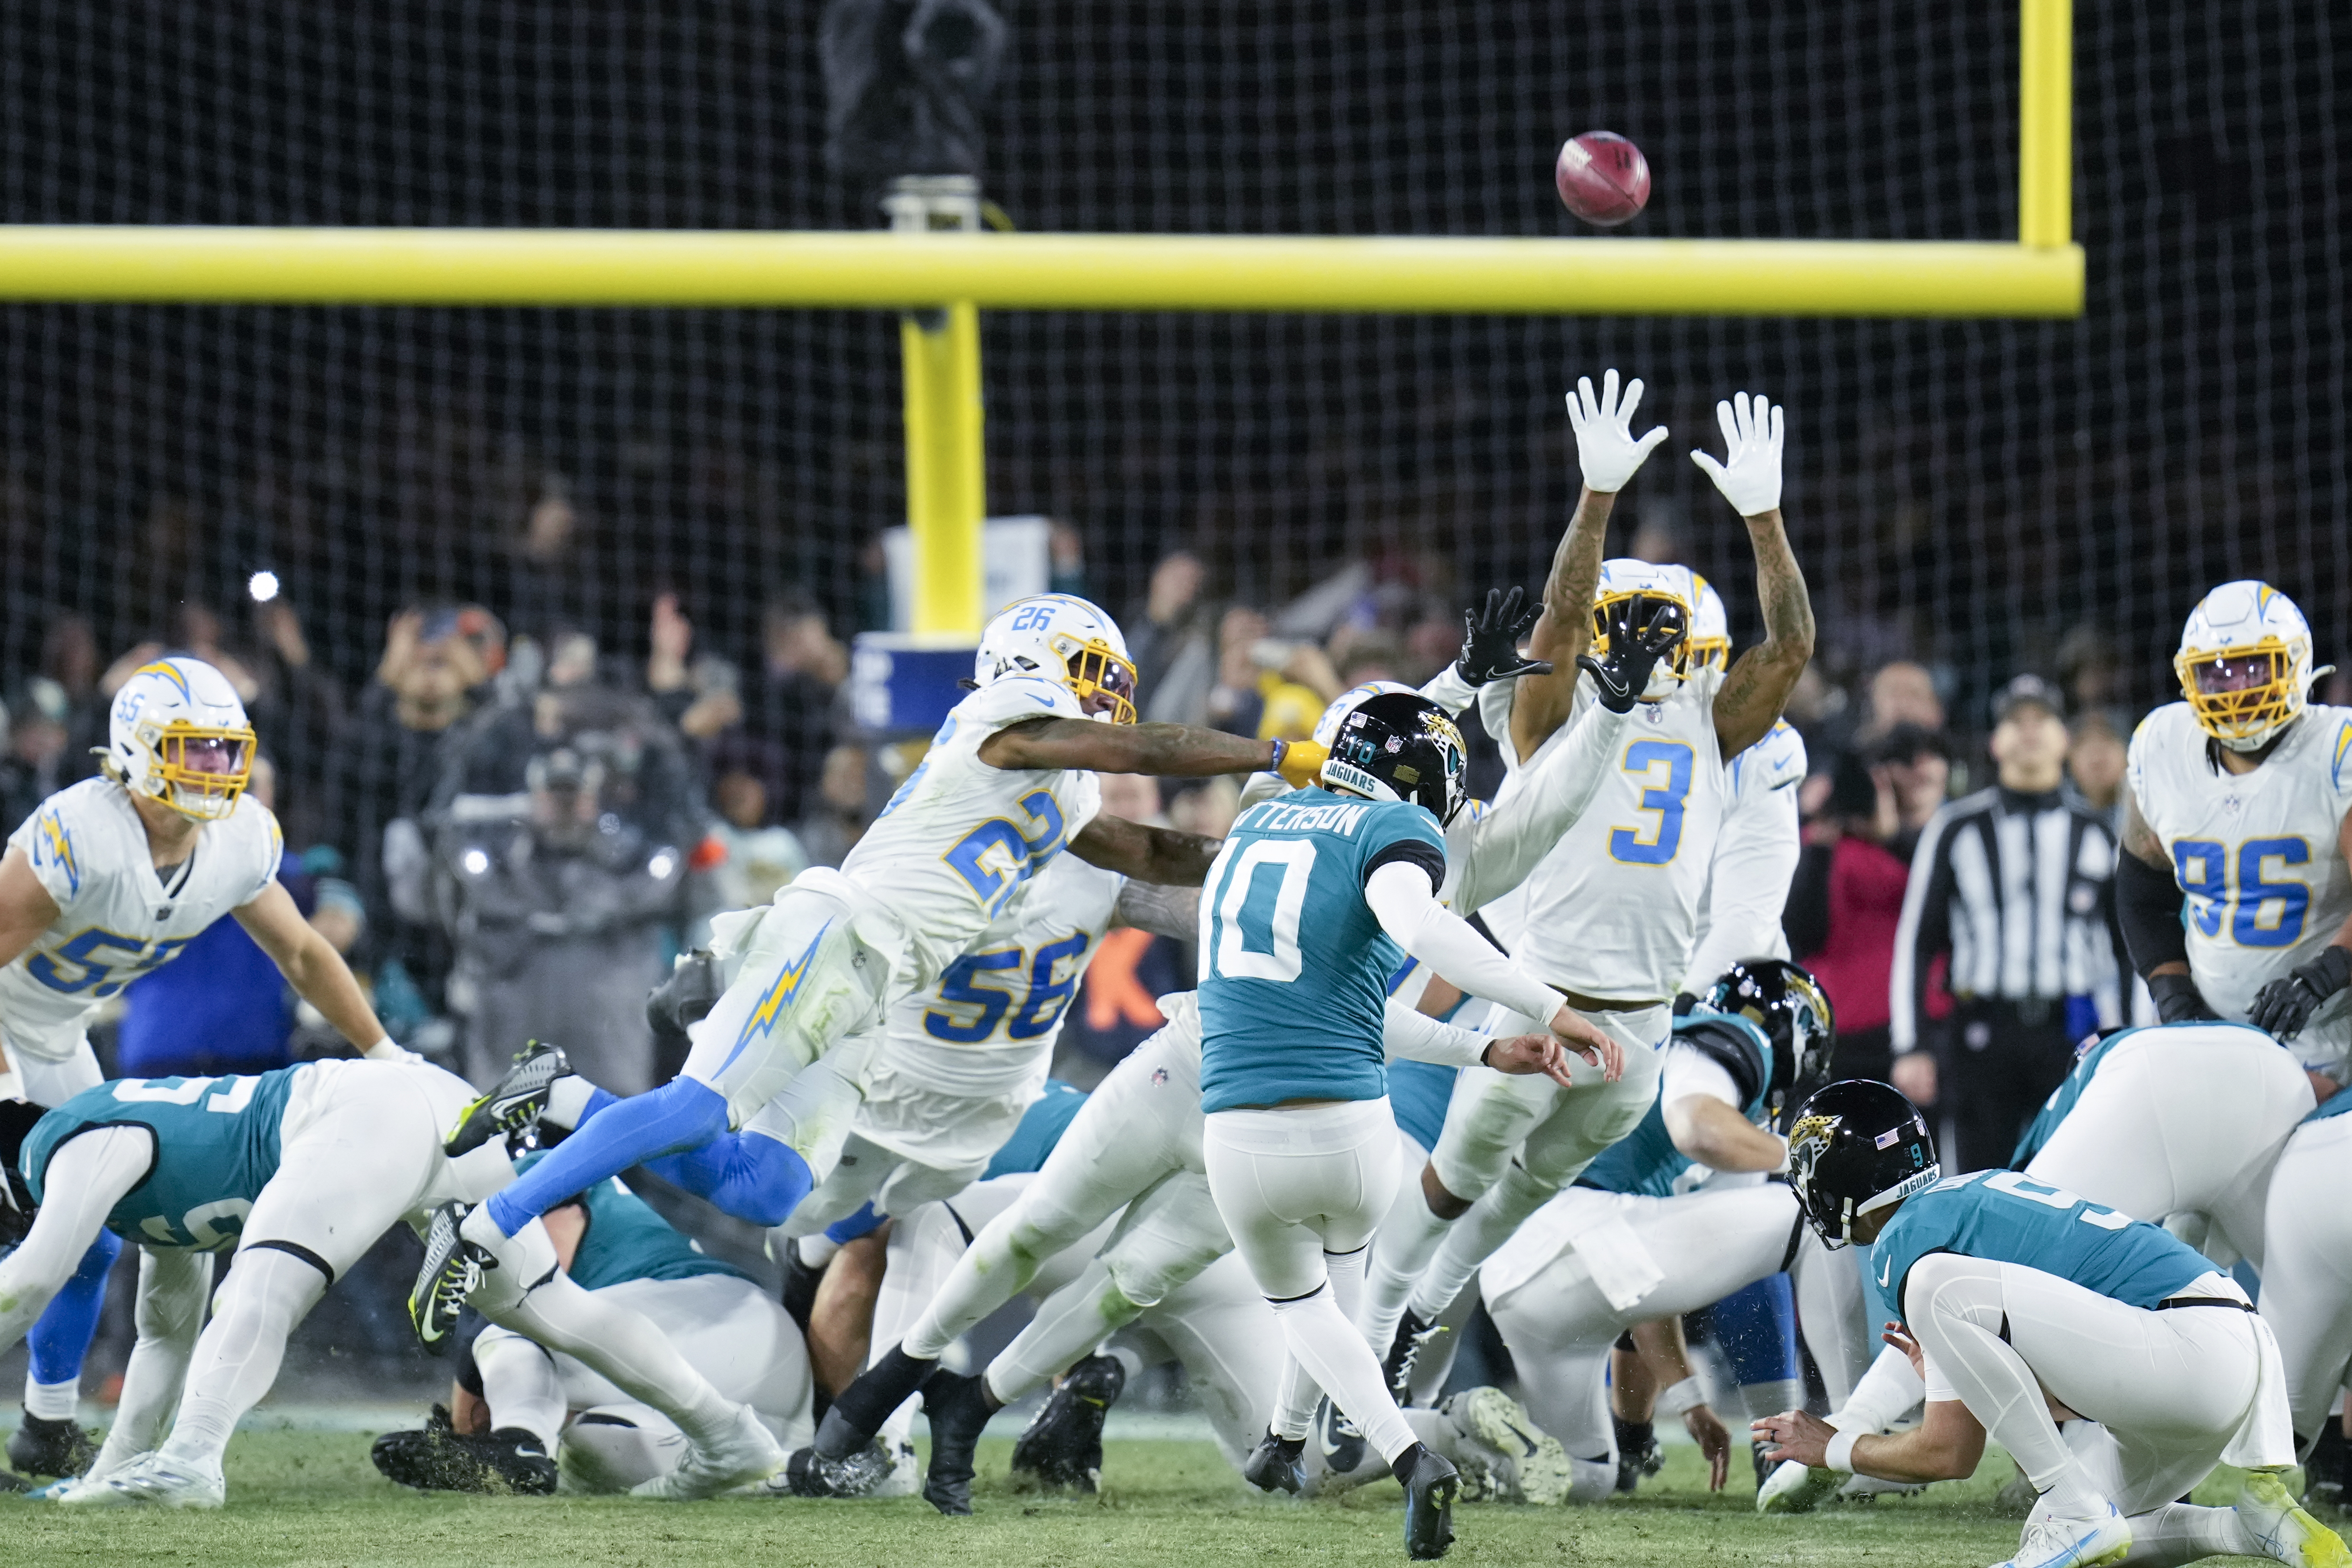 Lawrence rallies Jaguars from 27 down to beat Chargers 31-30 - Seattle  Sports